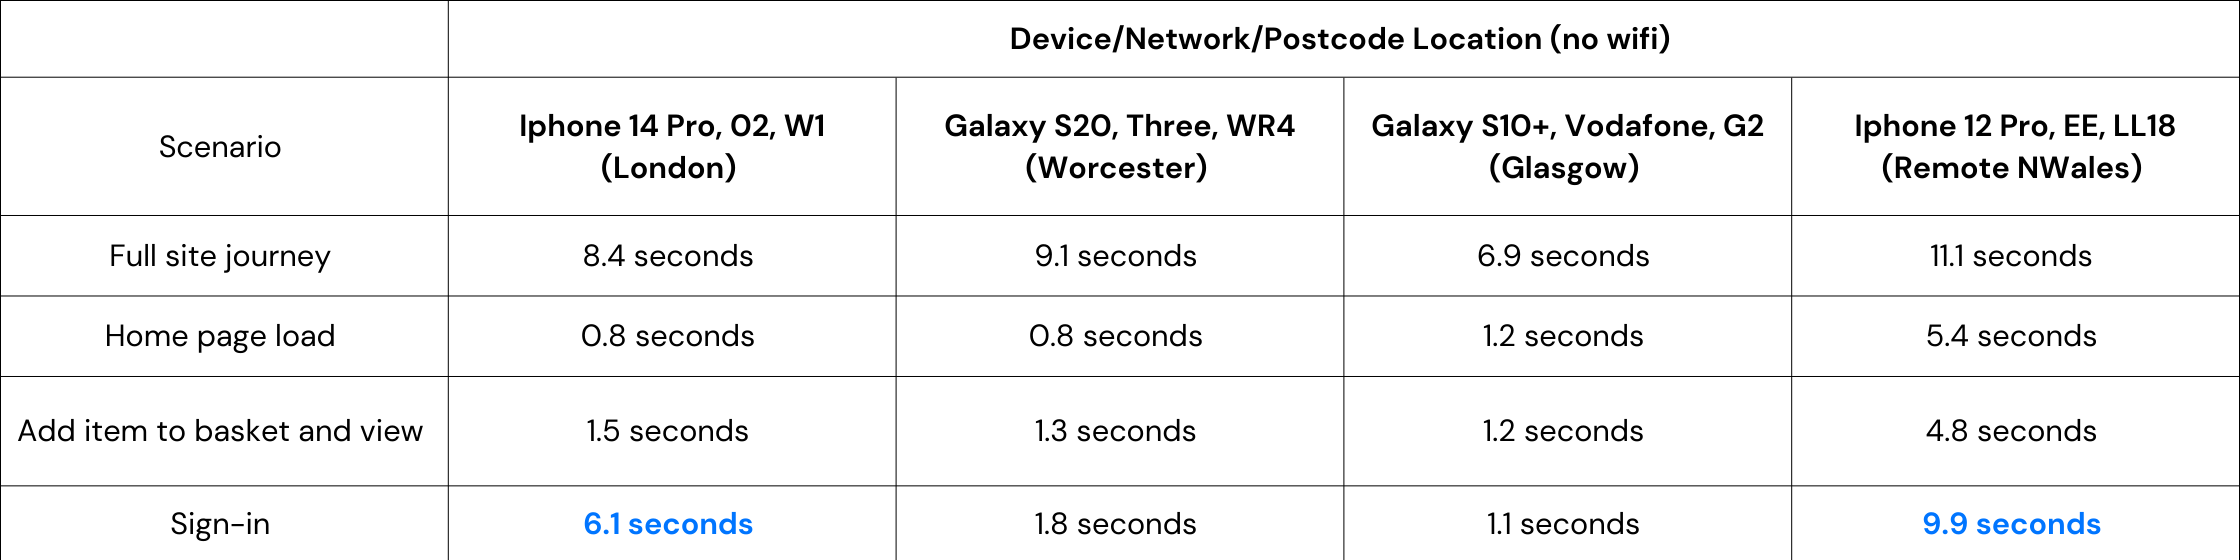 Device/Network/Postcode Location table